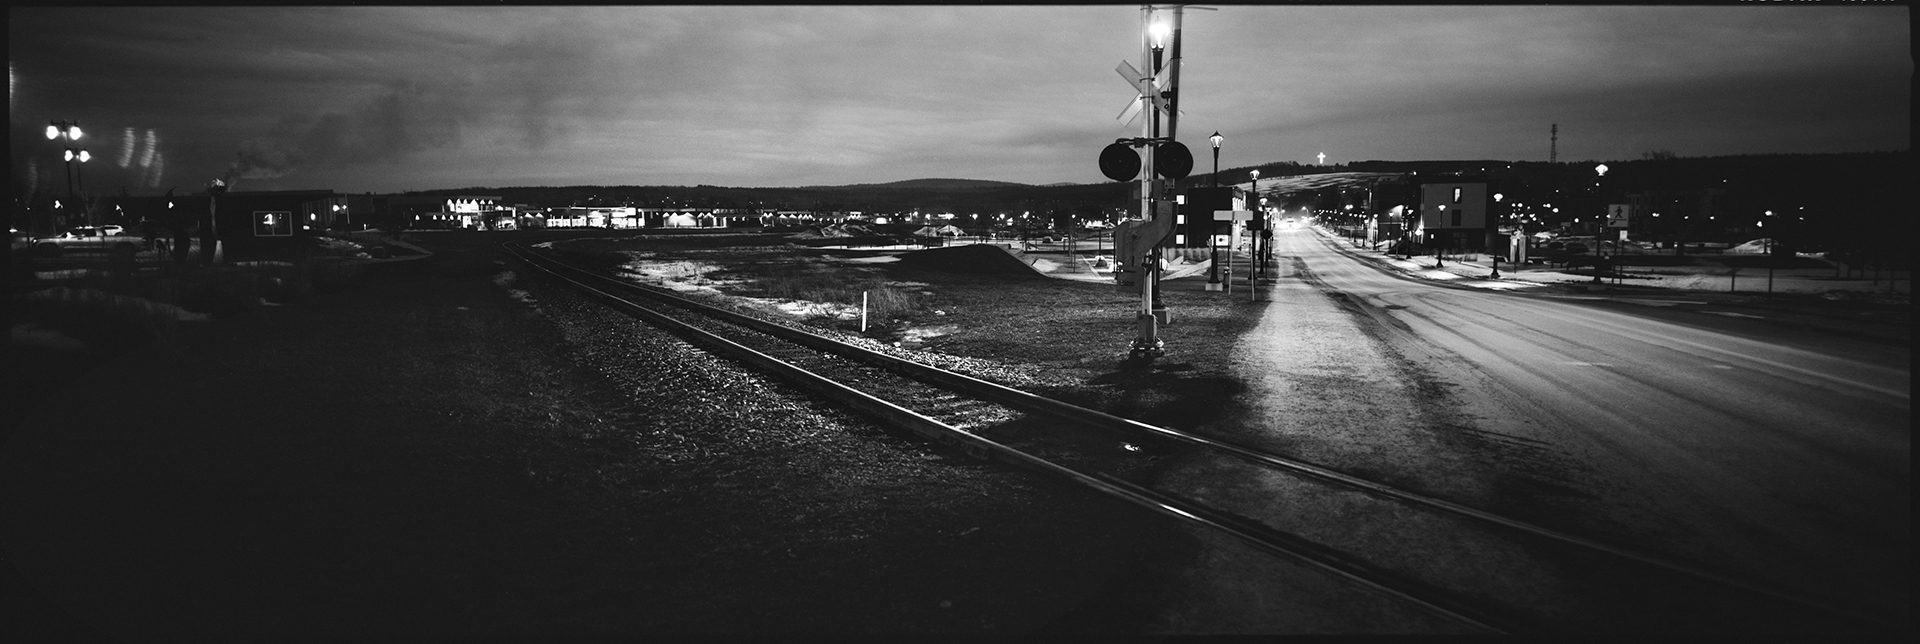 Black and white photo of a rail crossing in Lac-Mégantic, Que.